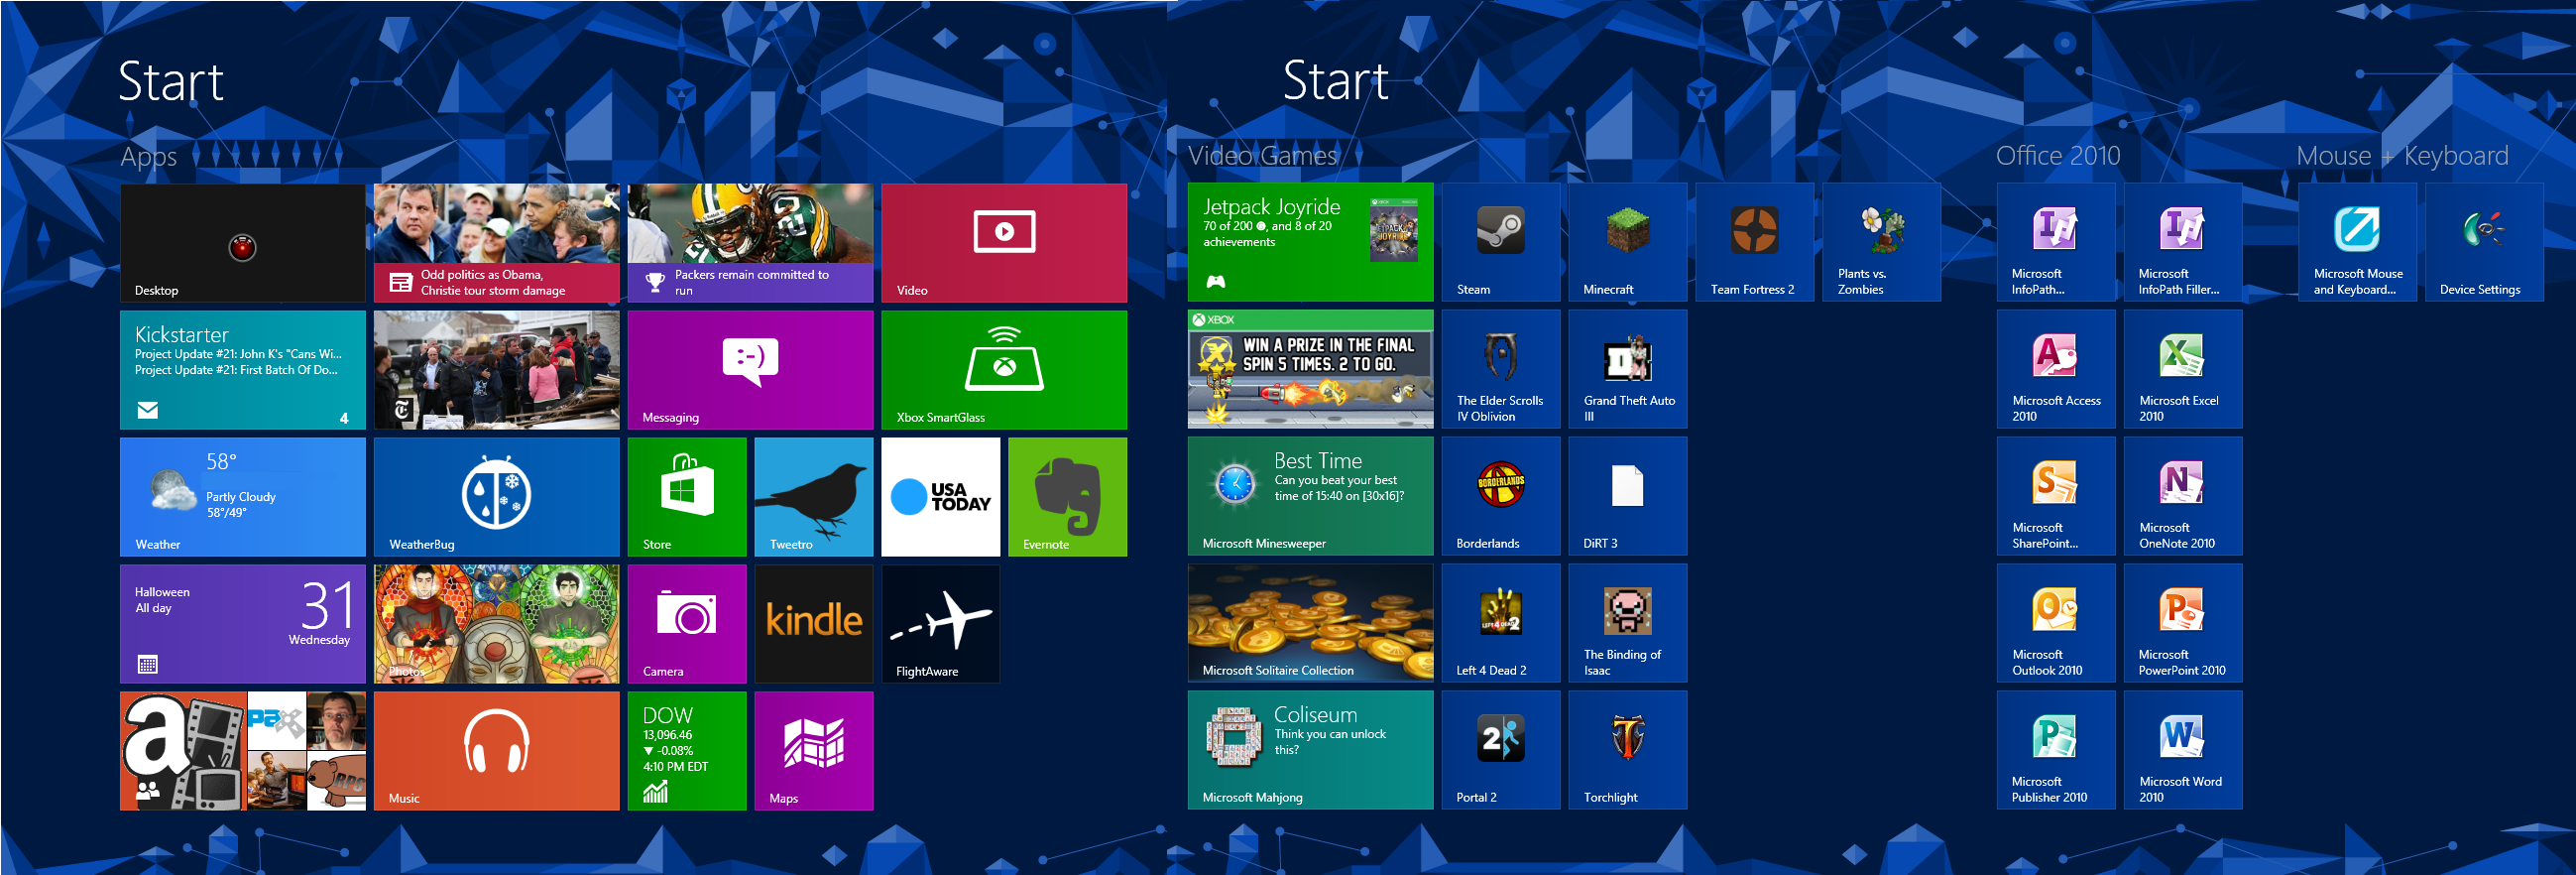 Share your Windows 8 start screen - General Discussion - Giant Bomb